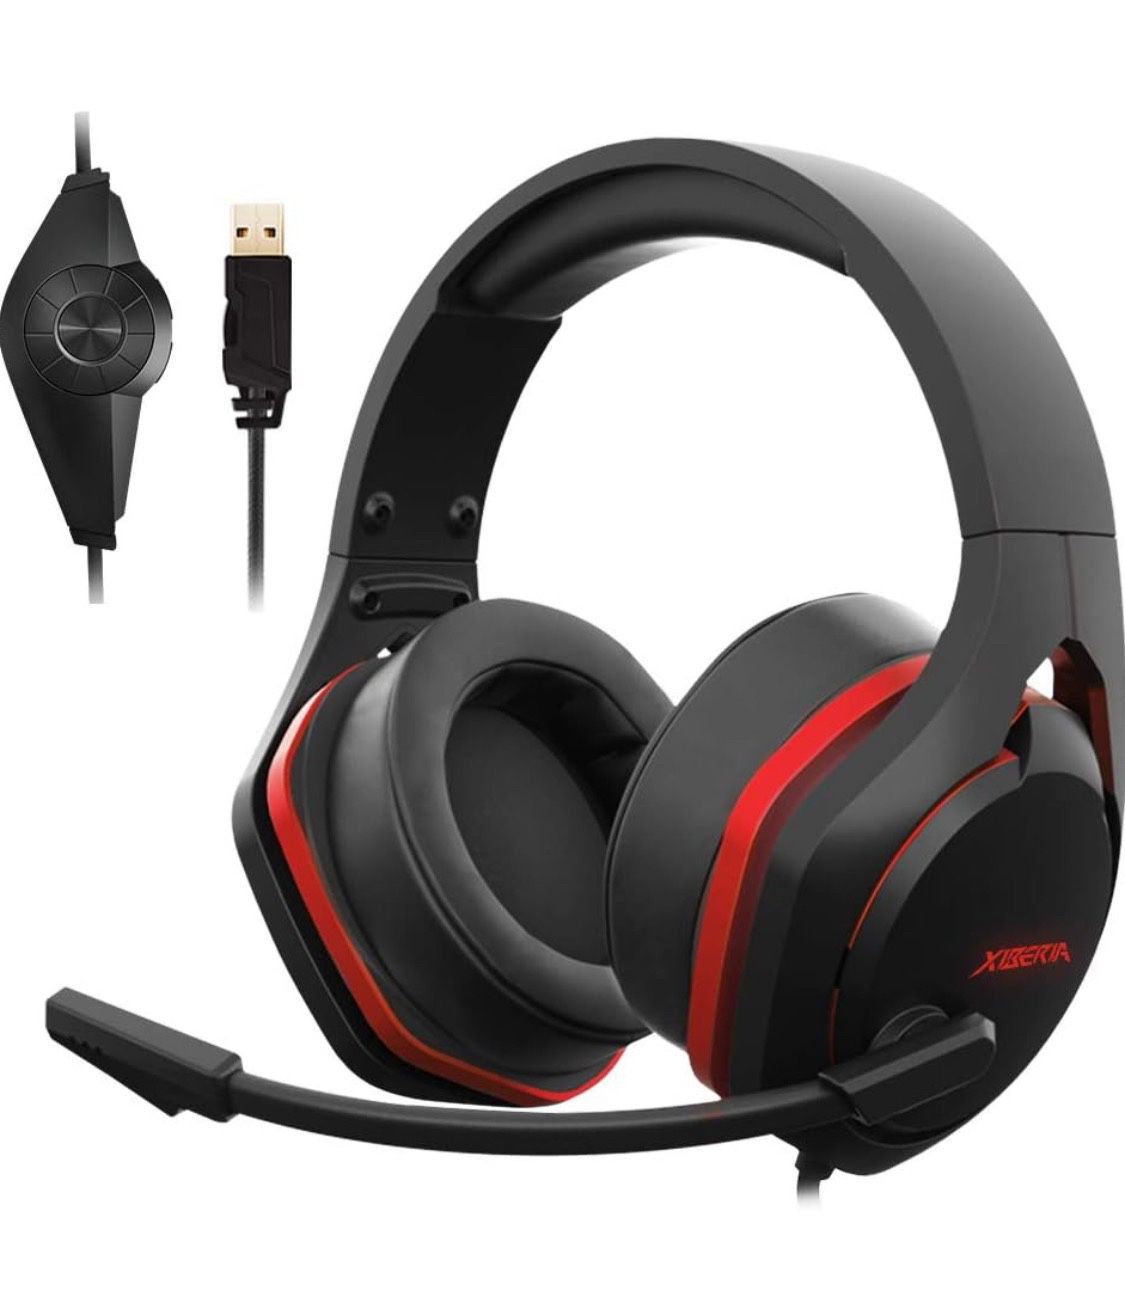 Gaming Headset for PC / Strong Bass Virtual 7.1 Sound / USB Headphones with Noise Cancelling Microphone RGB Lights Plug & Play for Laptops Computers